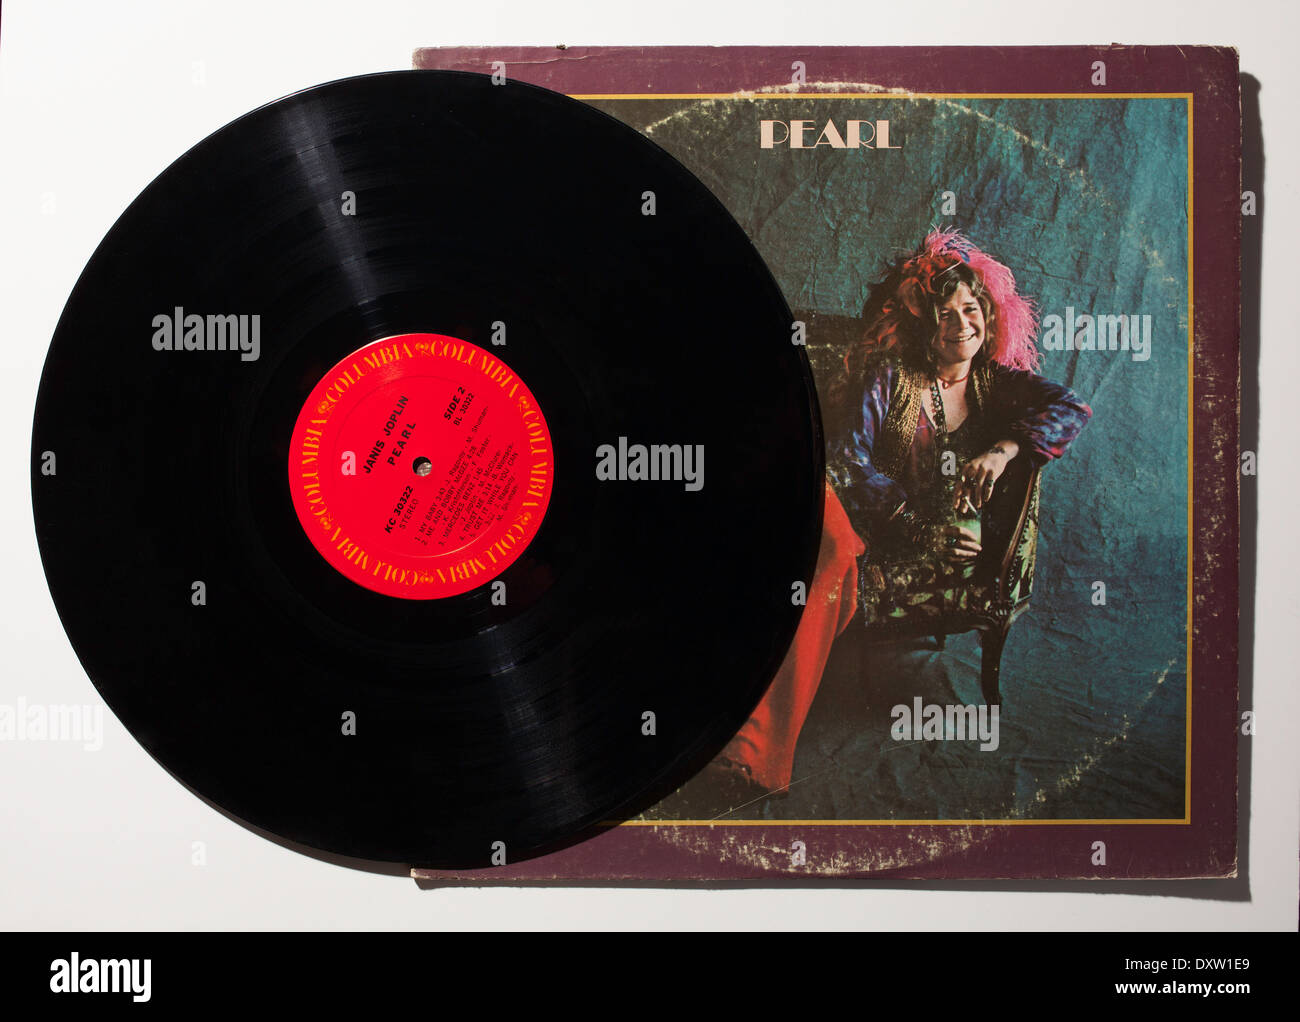 Vinyl record and jacket of Janis Joplin's Pearl album from 1971. Stock Photo